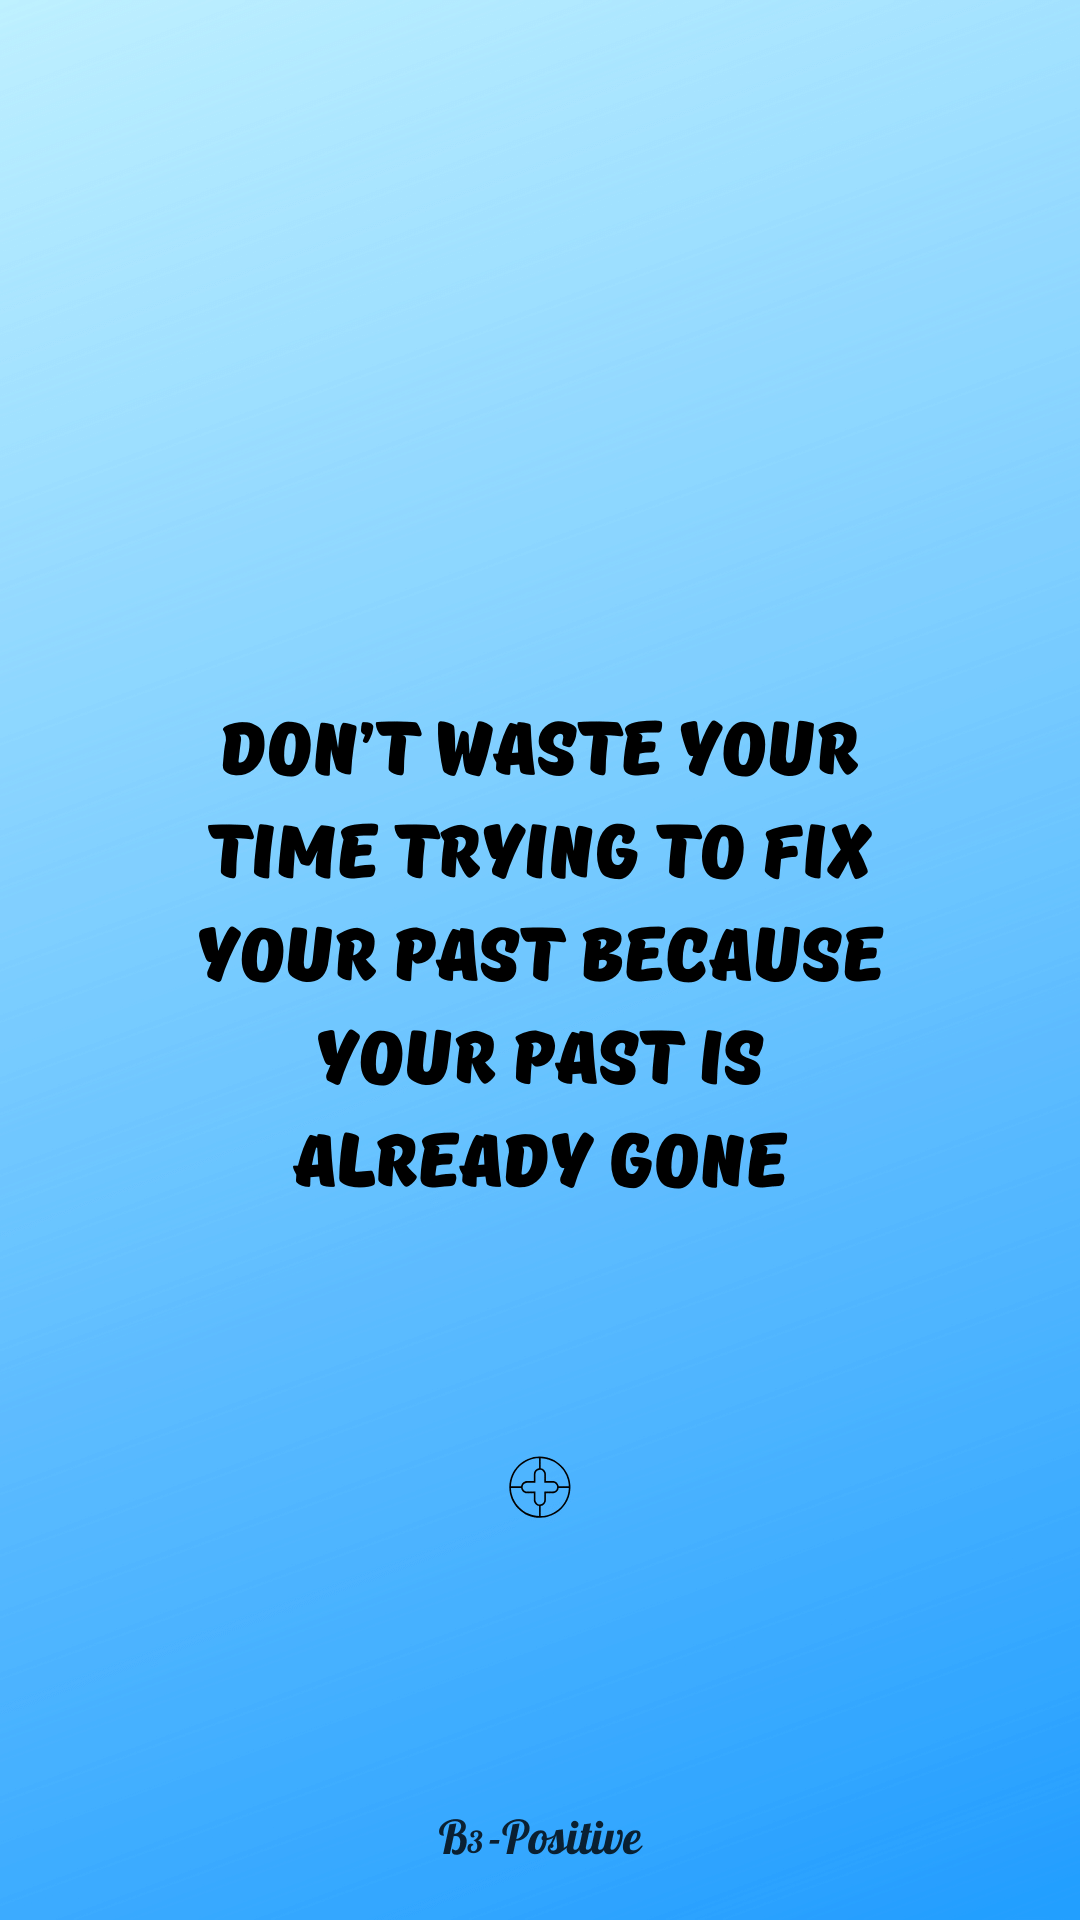 Stop Wasting Time Quotes Life Quotes Wallpaper. Positive quotes for life, Time quotes, Wasting time quotes